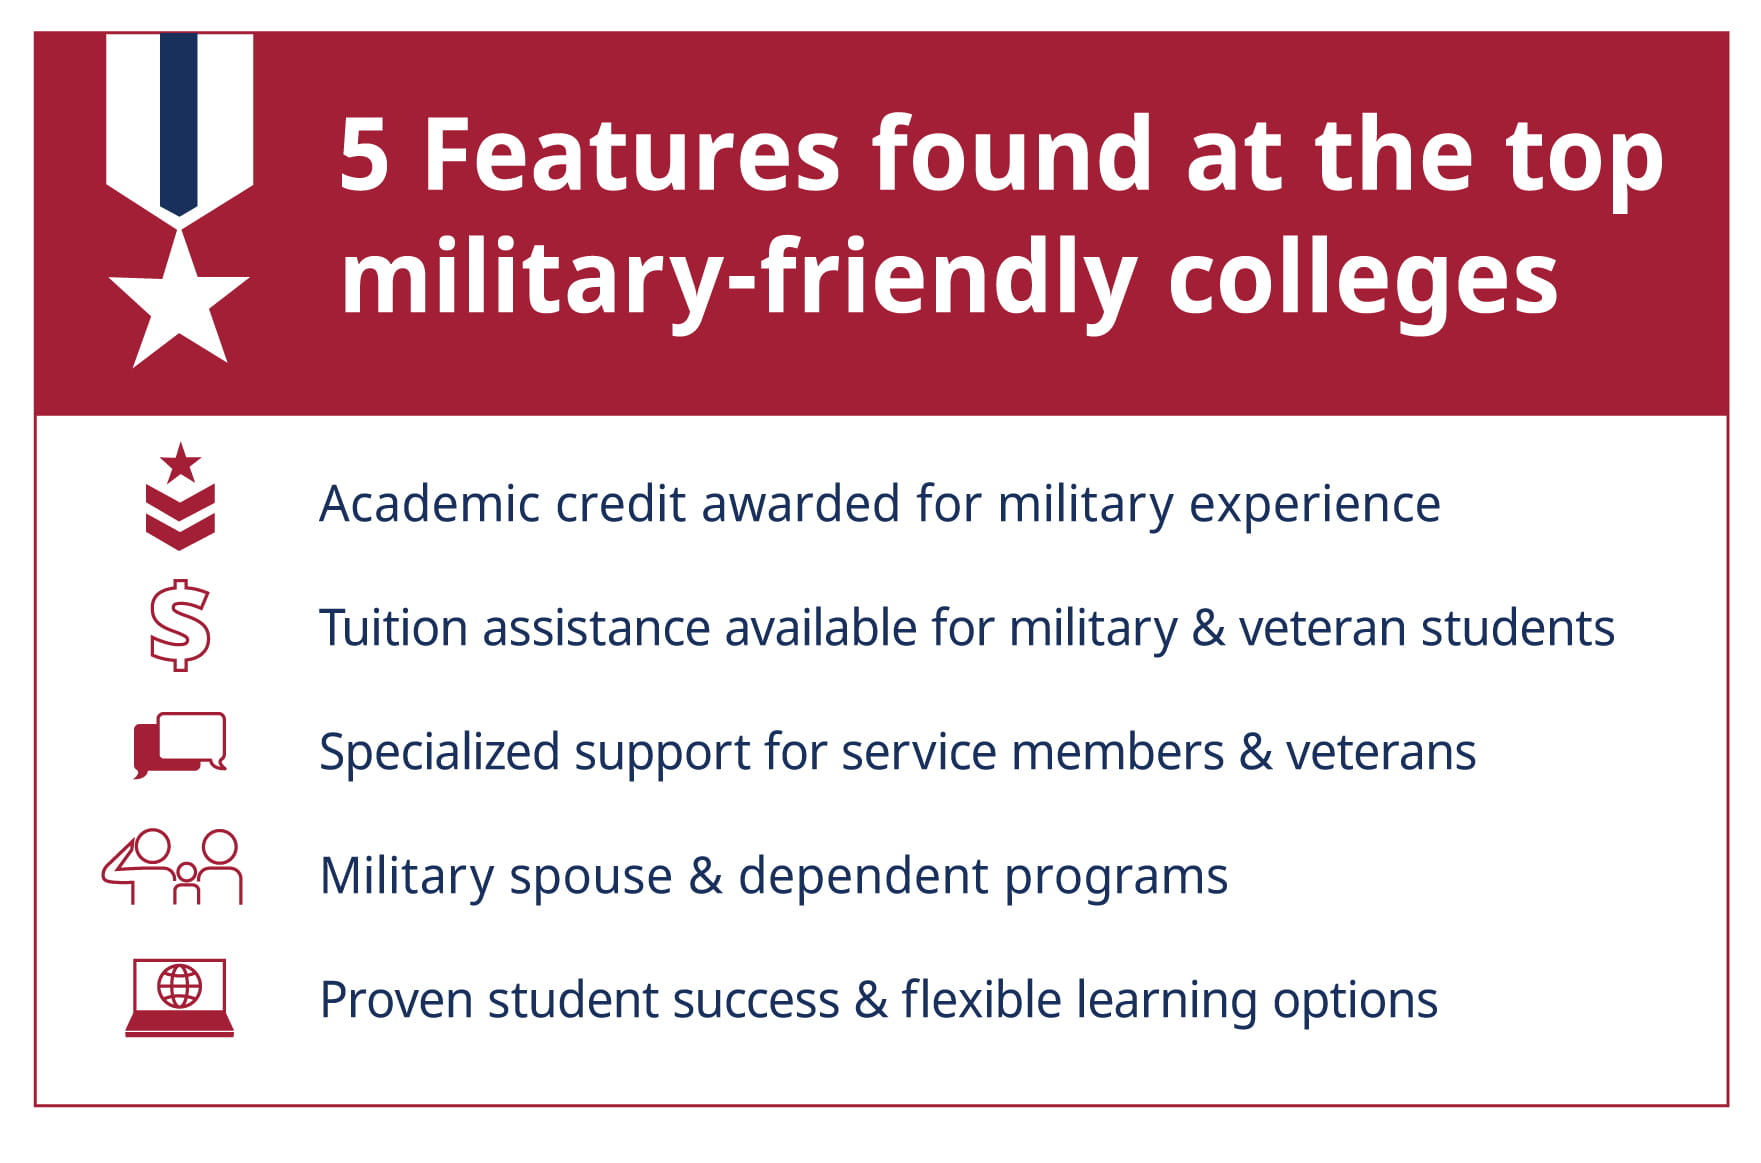 5 Features of Military Friendly Colleges